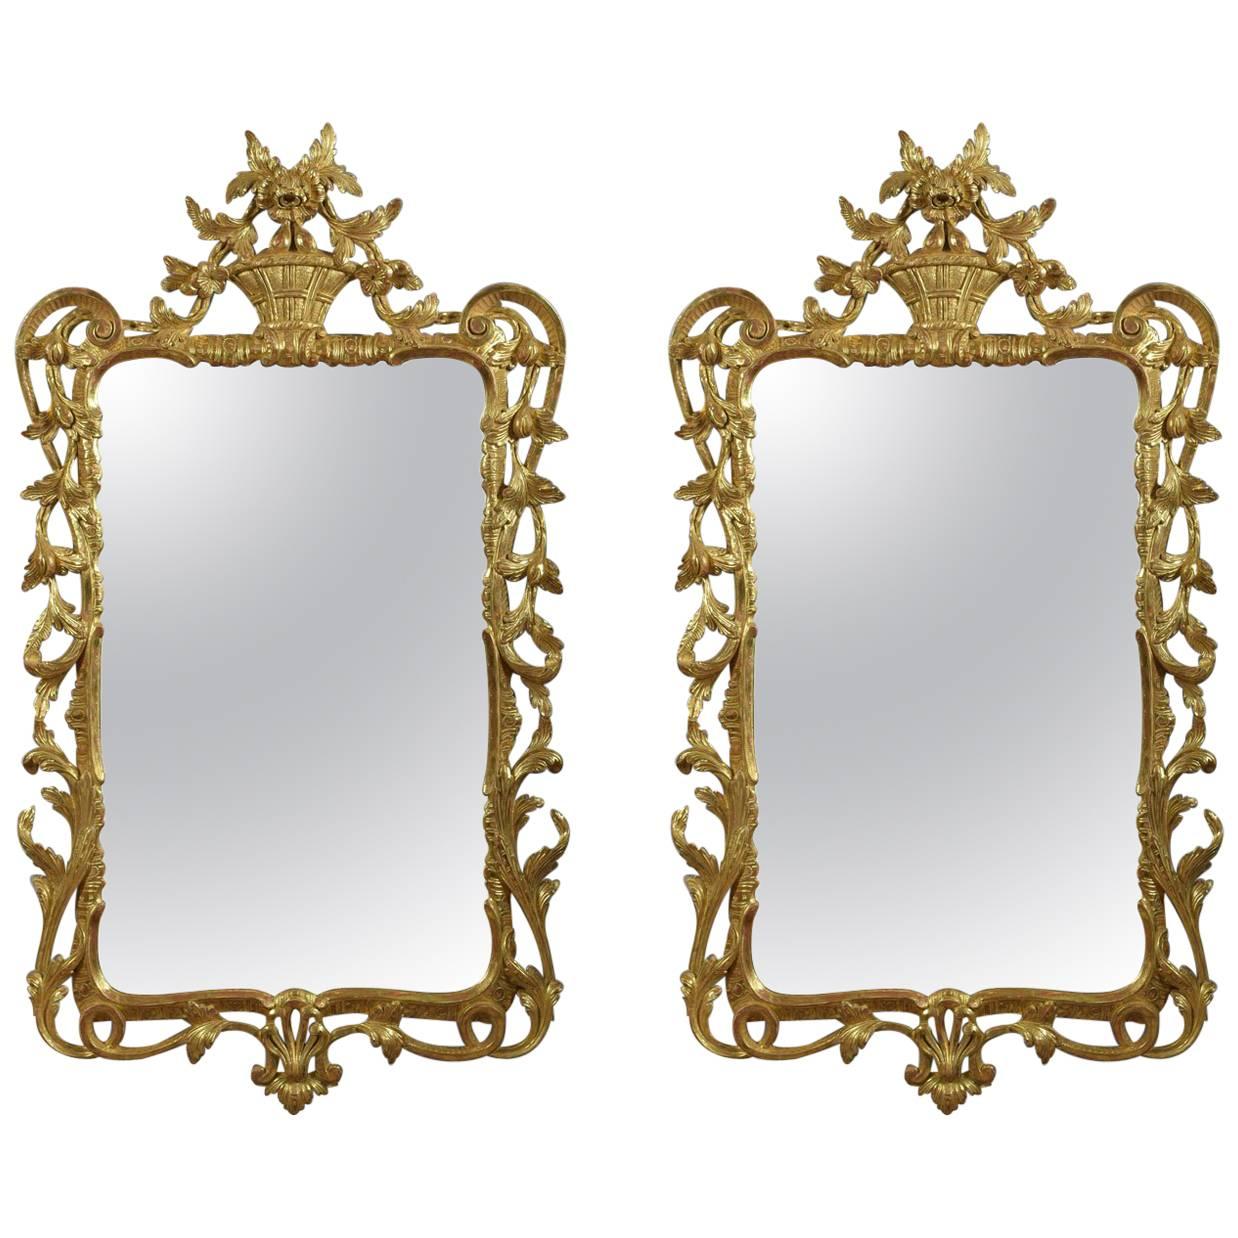 Pair of George III Style Gilt Framed Wall Mirrors